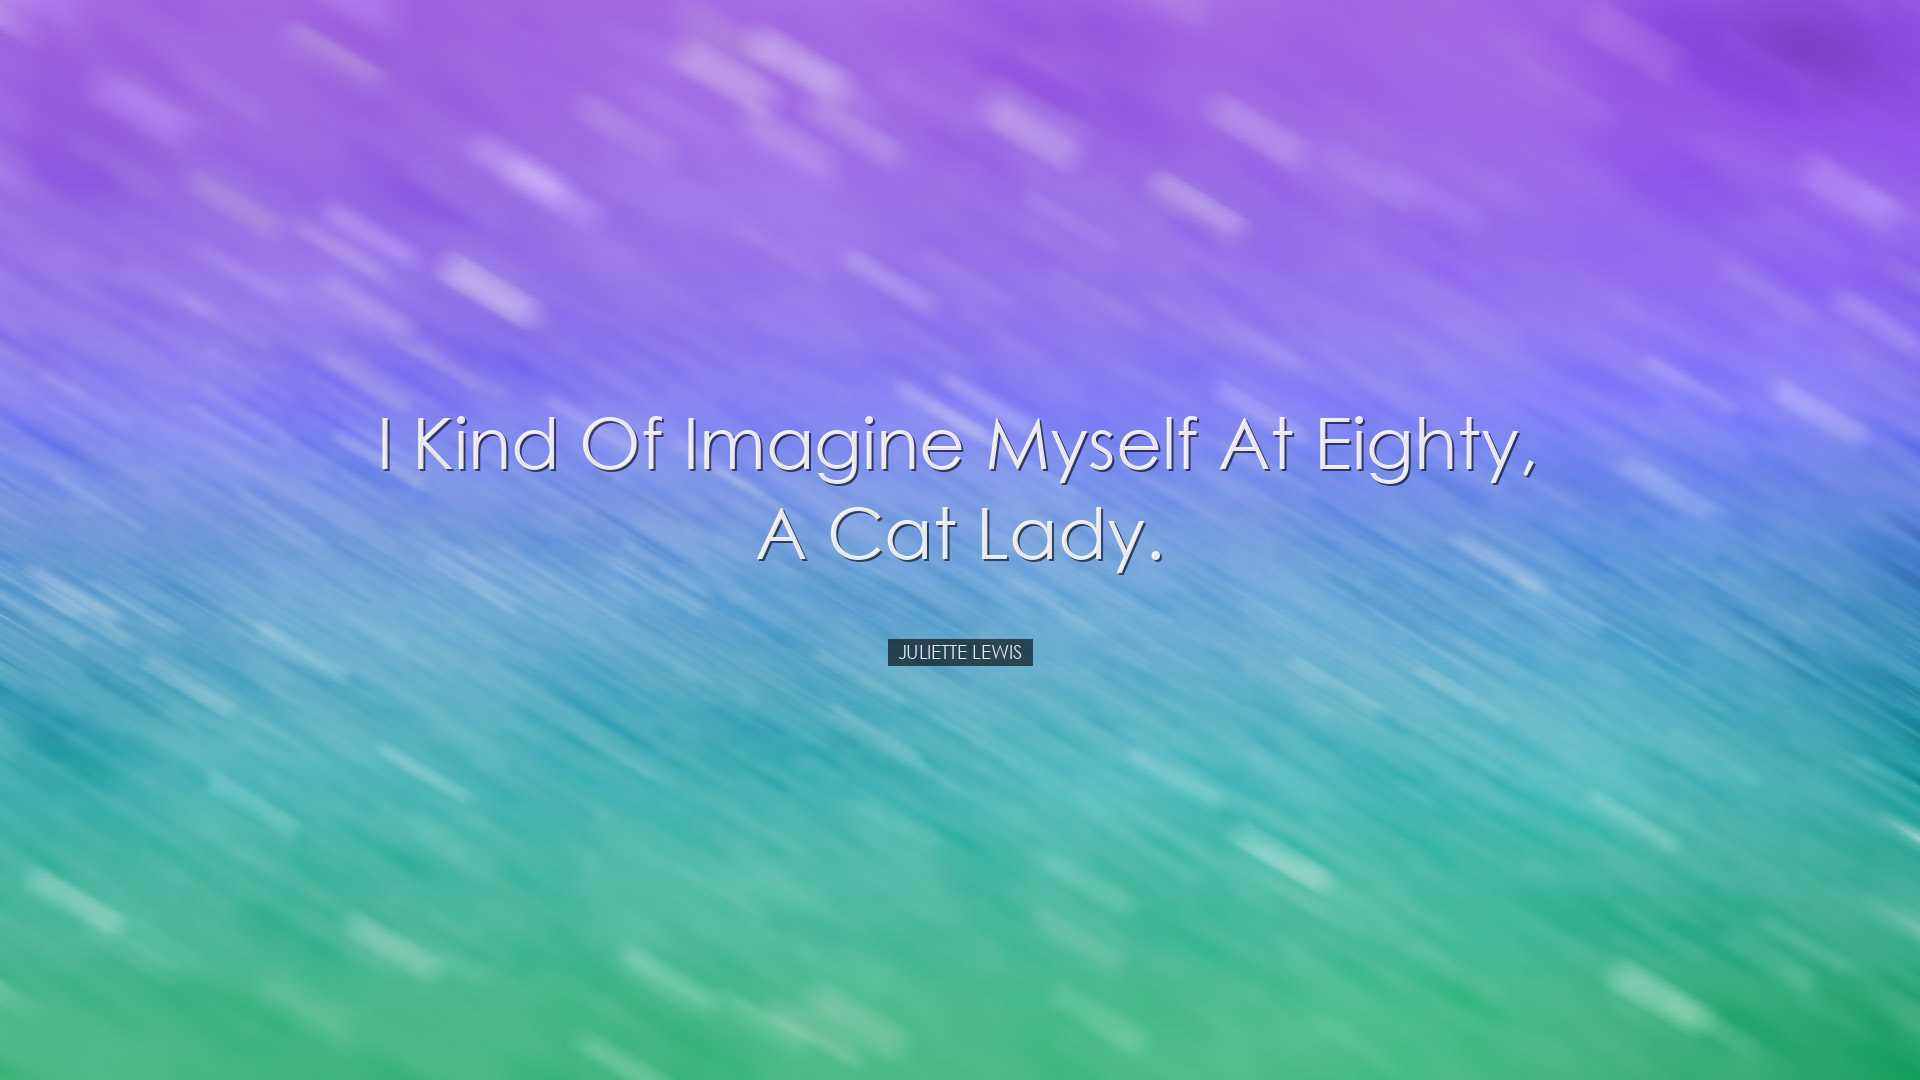 I kind of imagine myself at eighty, a cat lady. - Juliette Lewis